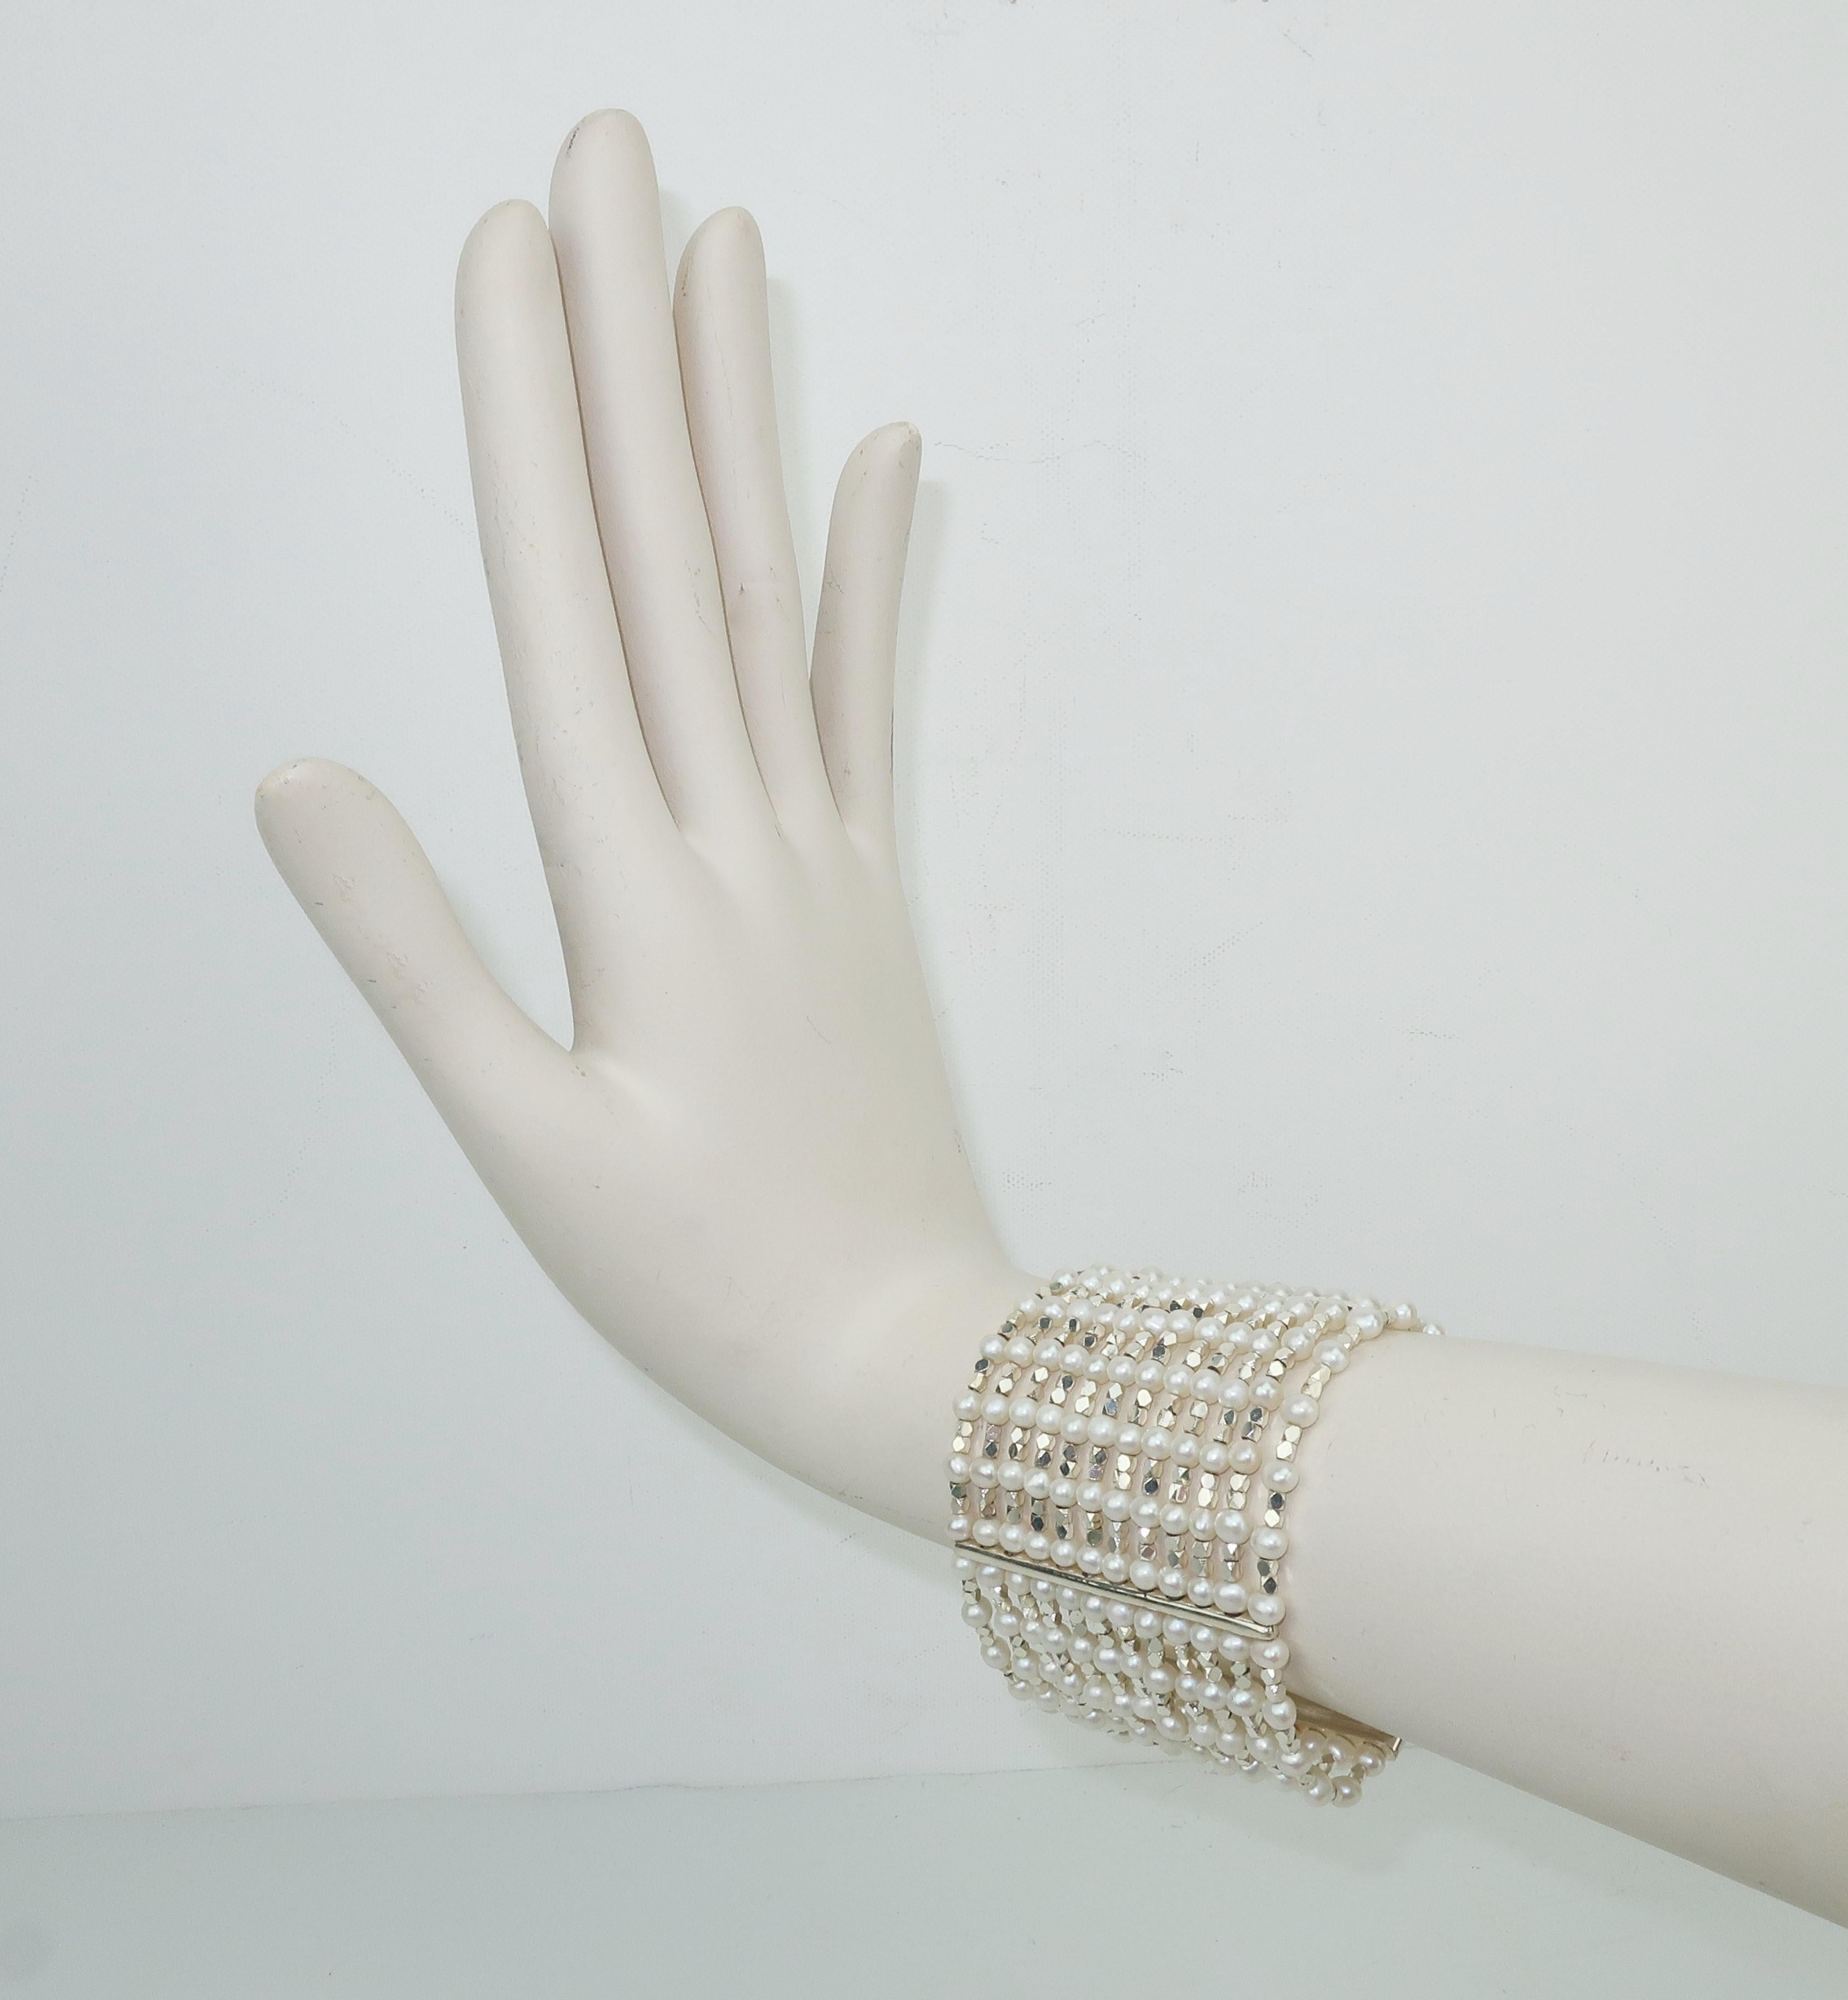 Carolee has been a trendsetting costume jewelry company since the 1970’s.  This 1980's multi strand bracelet has an opulent aesthetic with twelve rows of faceted sterling silver beads interspersed with faux pearls suspended by sterling silver